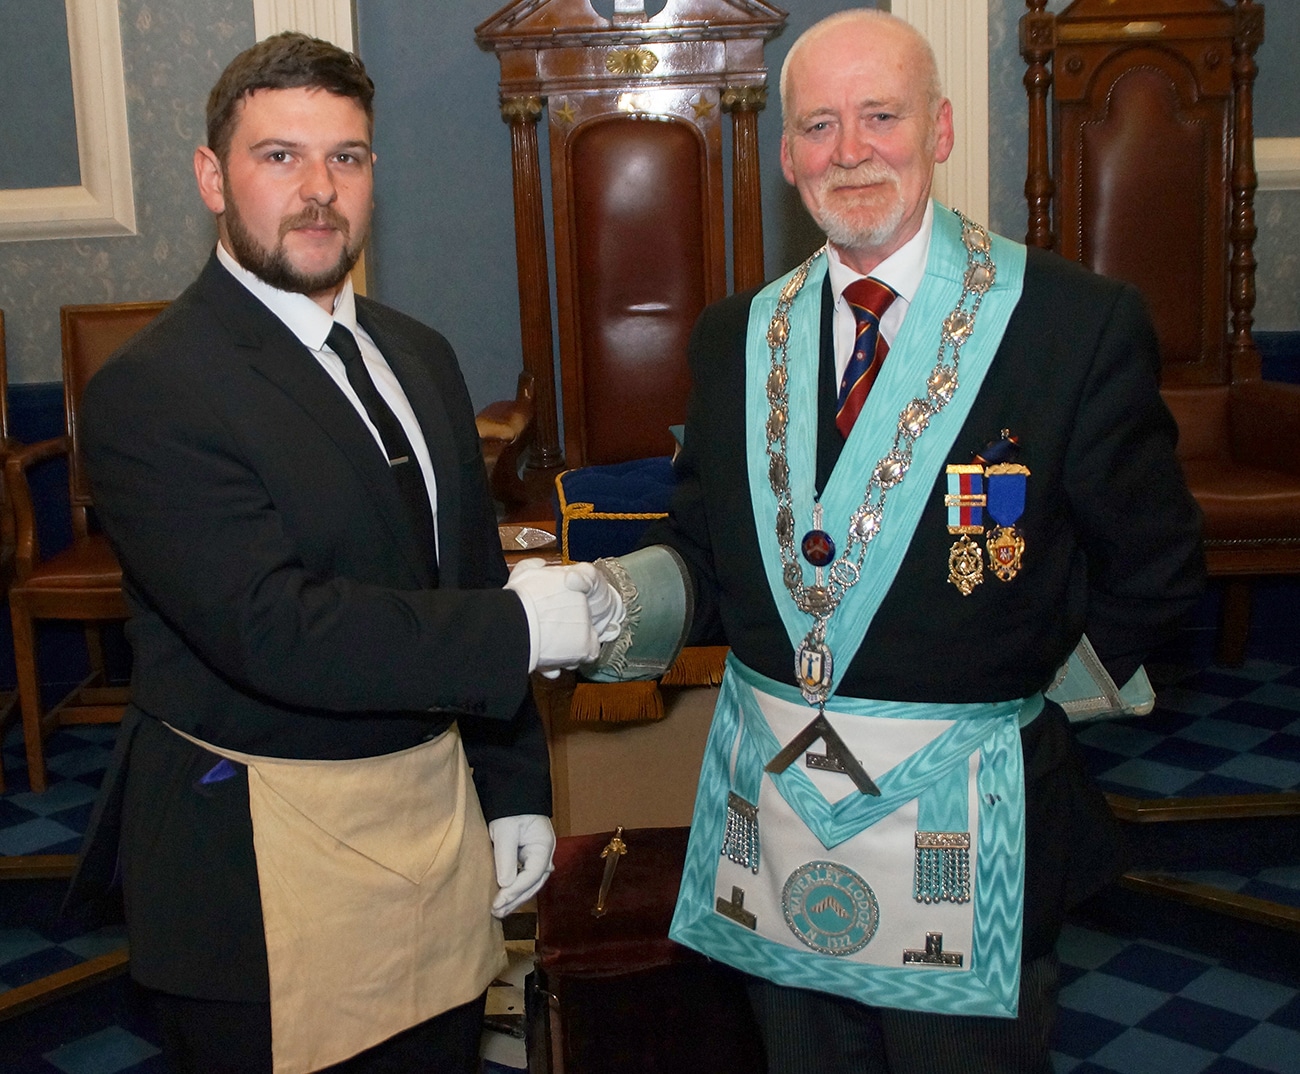 Third Initiation in a year at Waverley Lodge No 1322